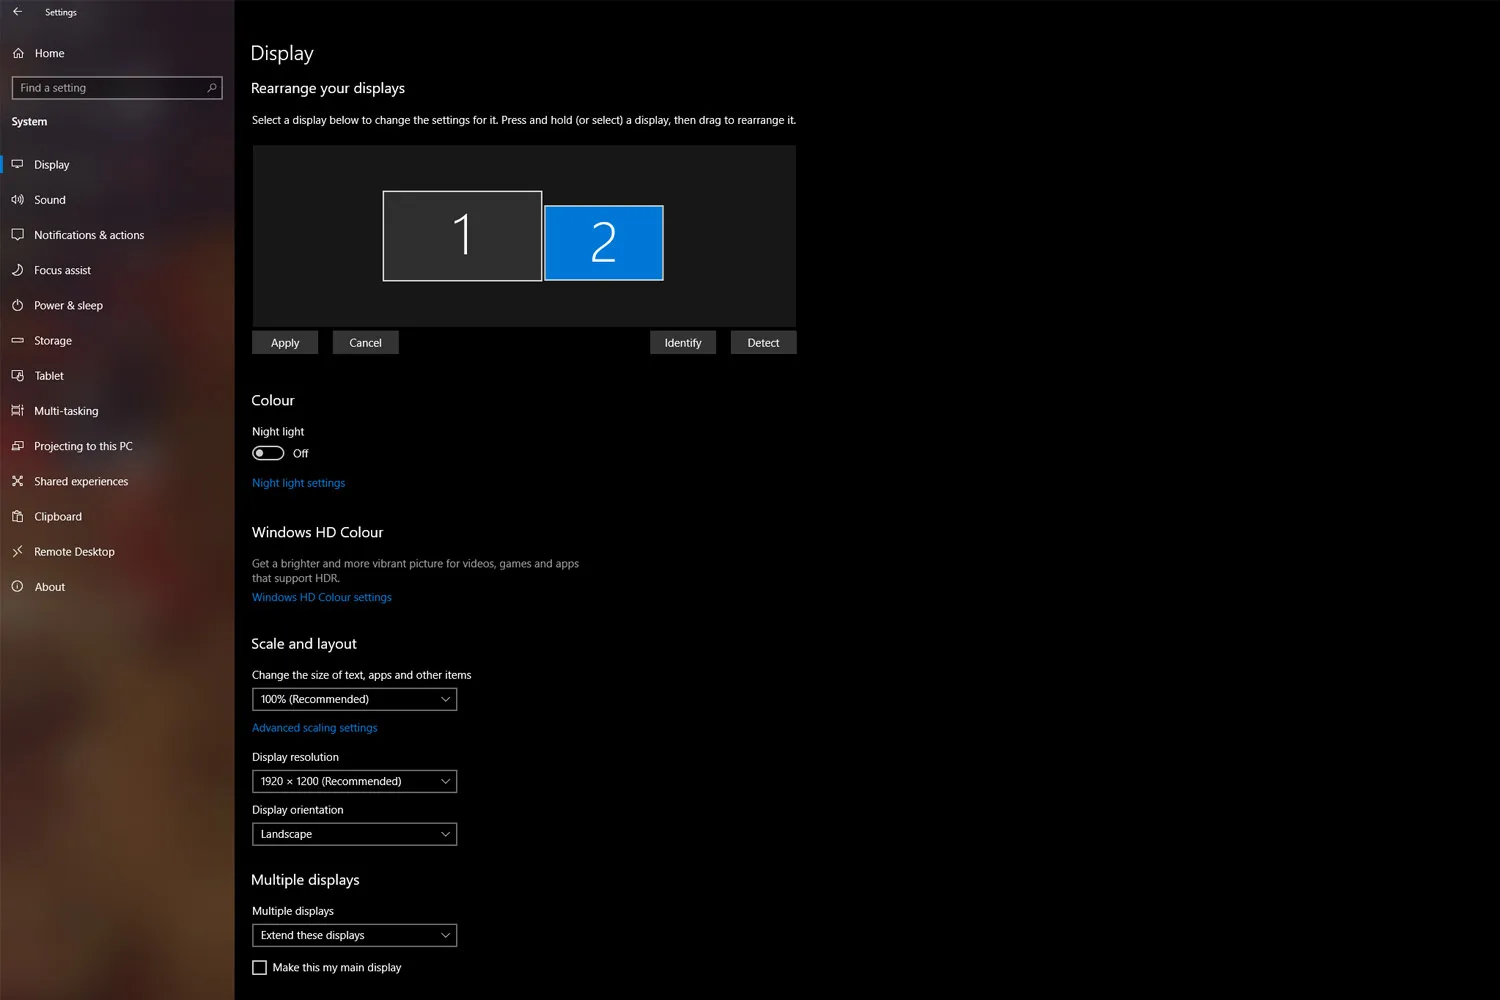 The Changing Display Settings screen in Windows 10.